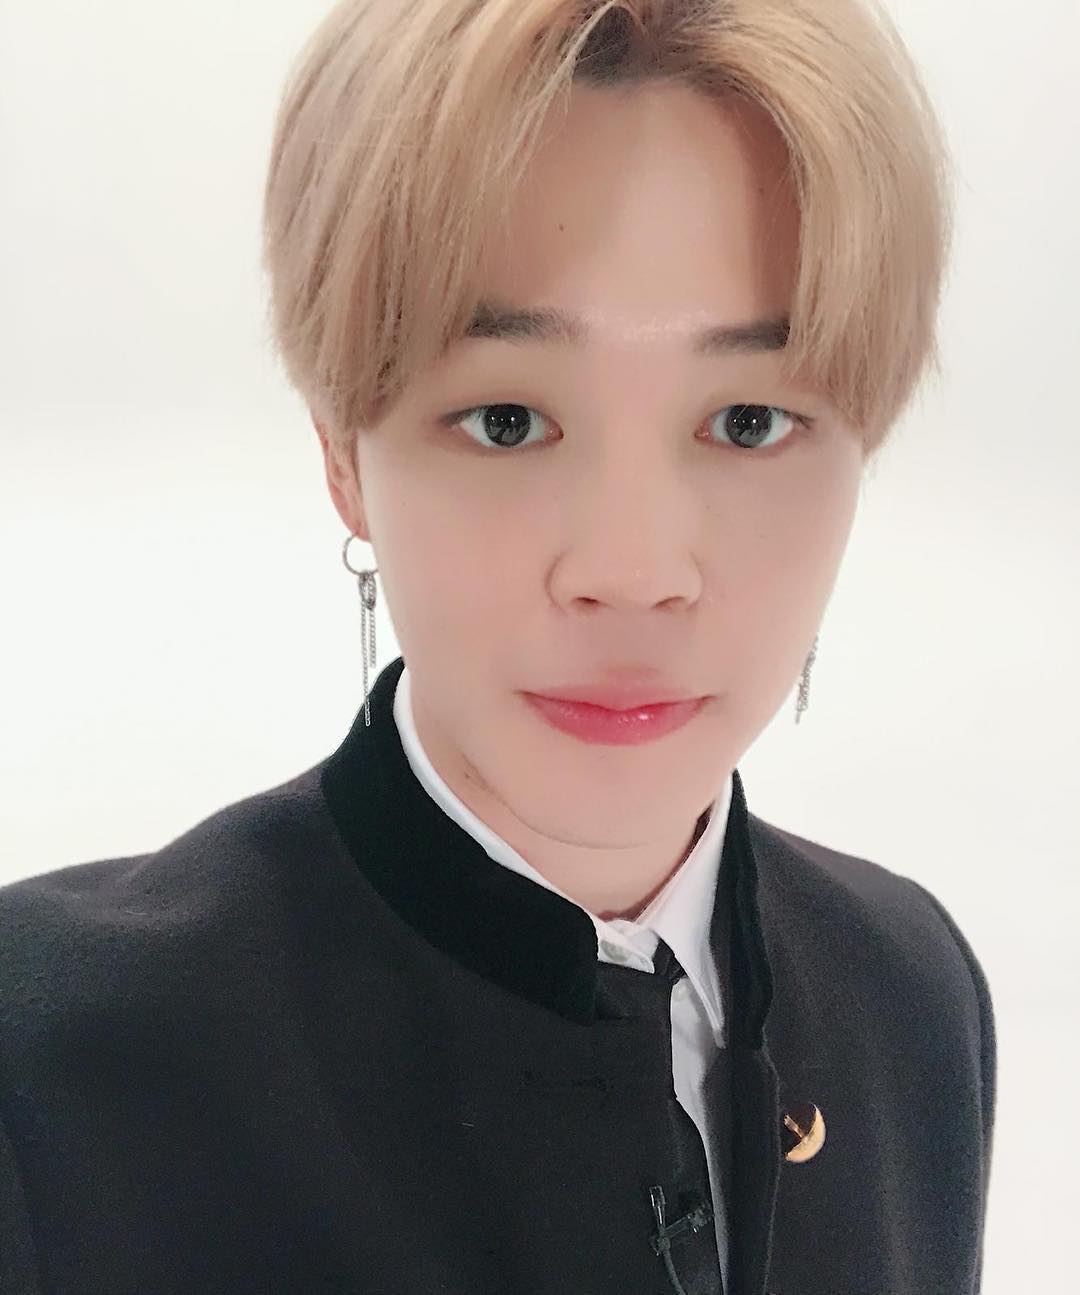 Jimin Phone Number, WhatsApp Number Contact Number Mobile